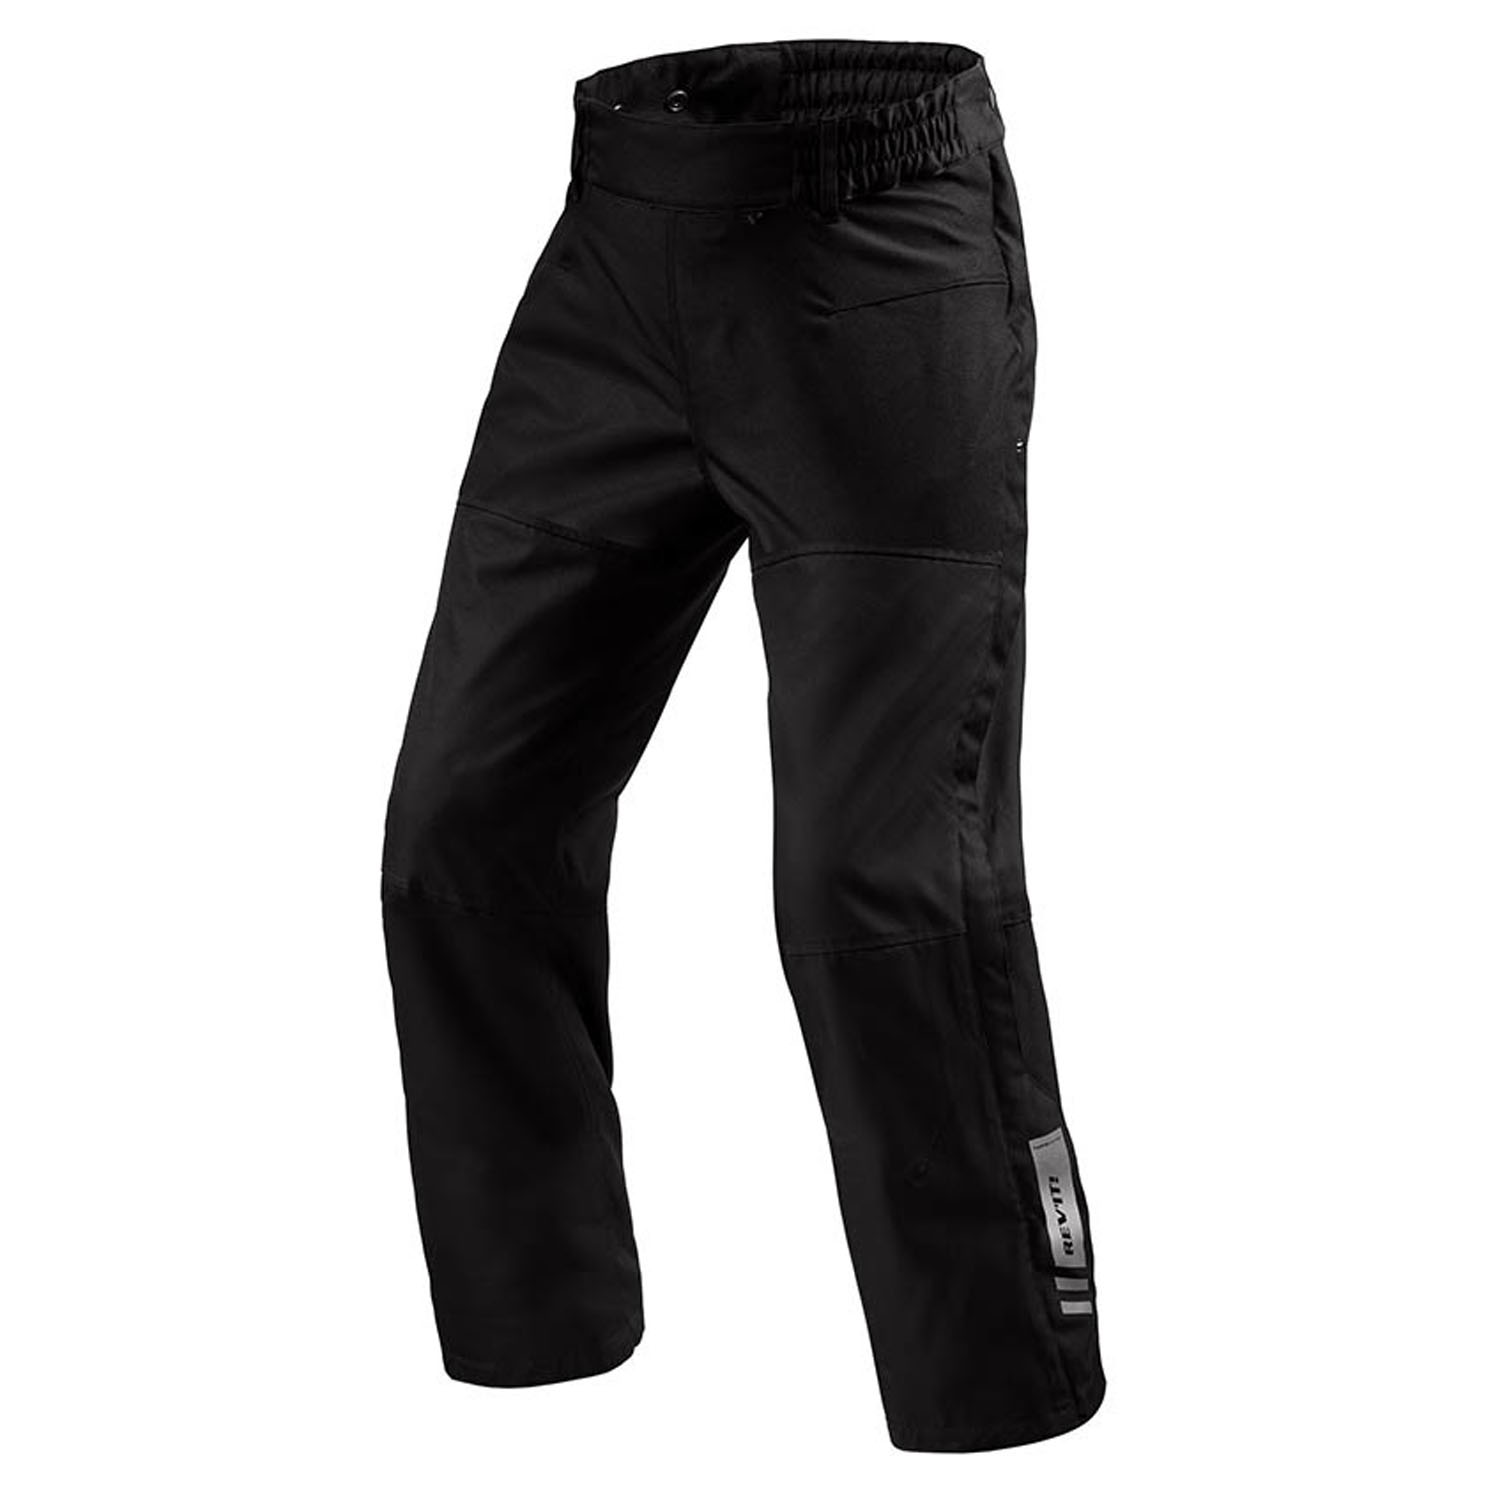 Image of EU REV'IT! Pants Axis 2 H2O Black Standard Motorcycle Pants Taille XS